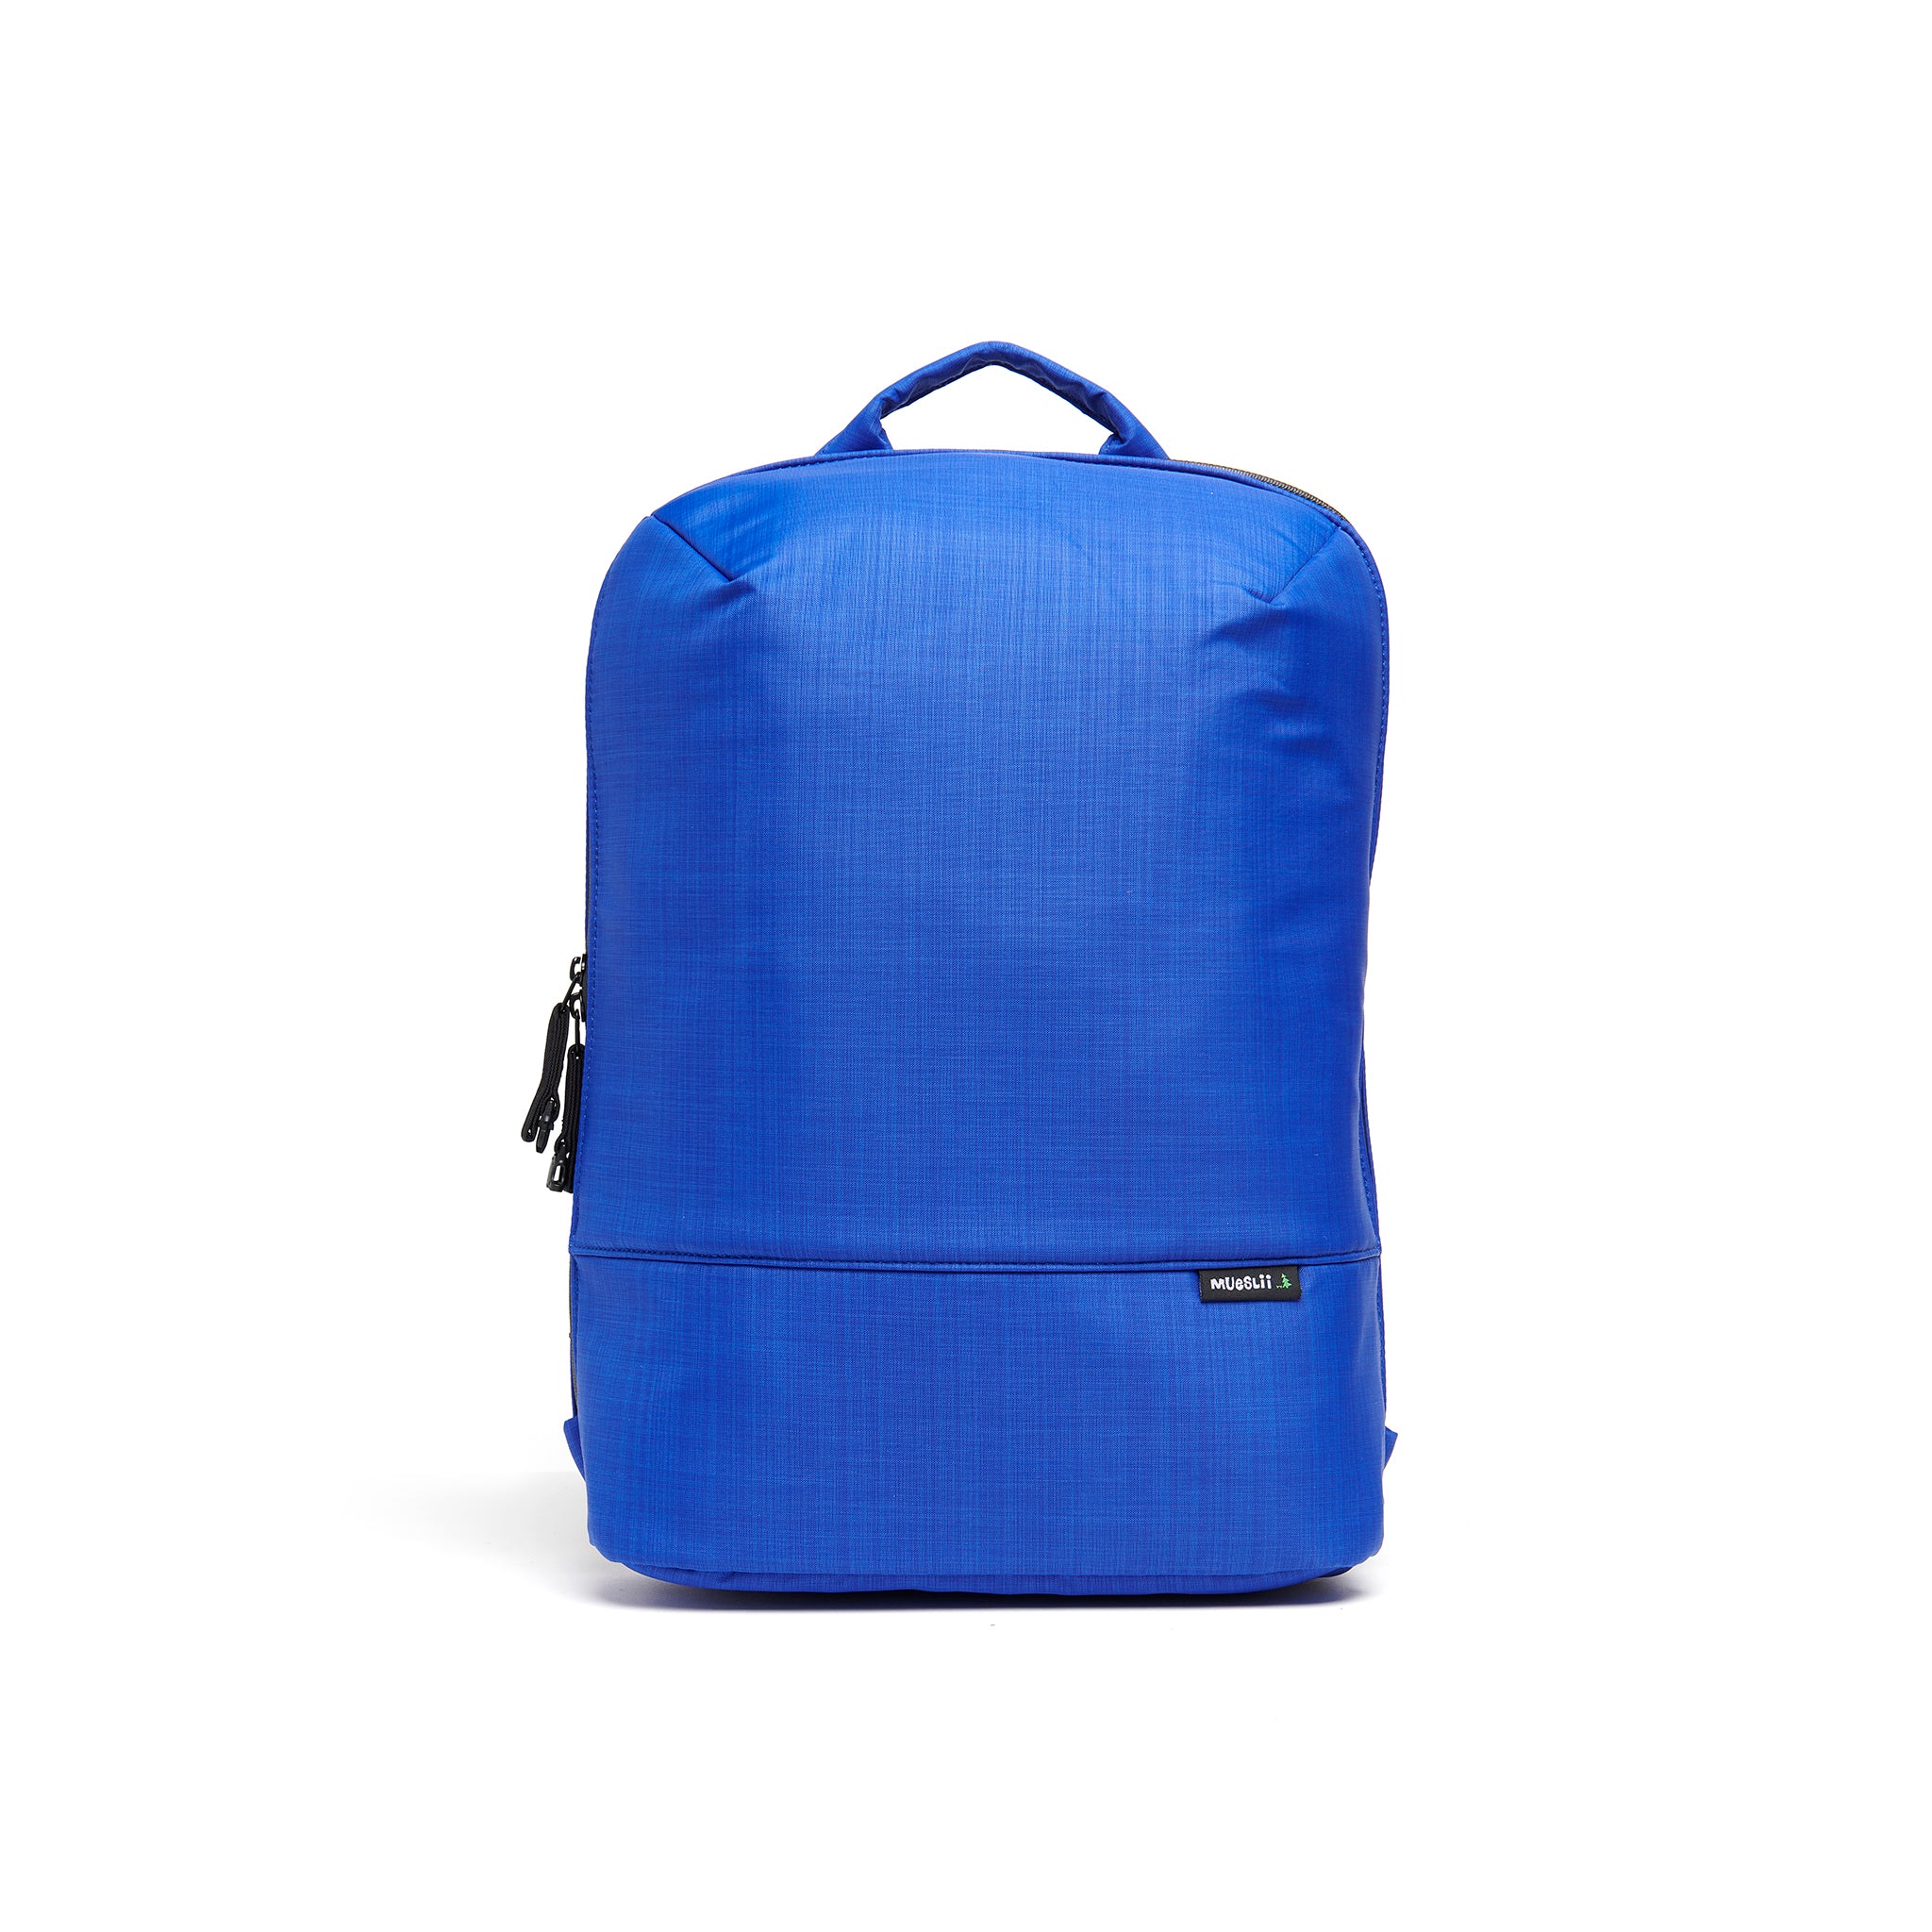 Mueslii daily backpack, made of  water resistant canvas nylon, with a laptop compartment, color summer blue, front view.